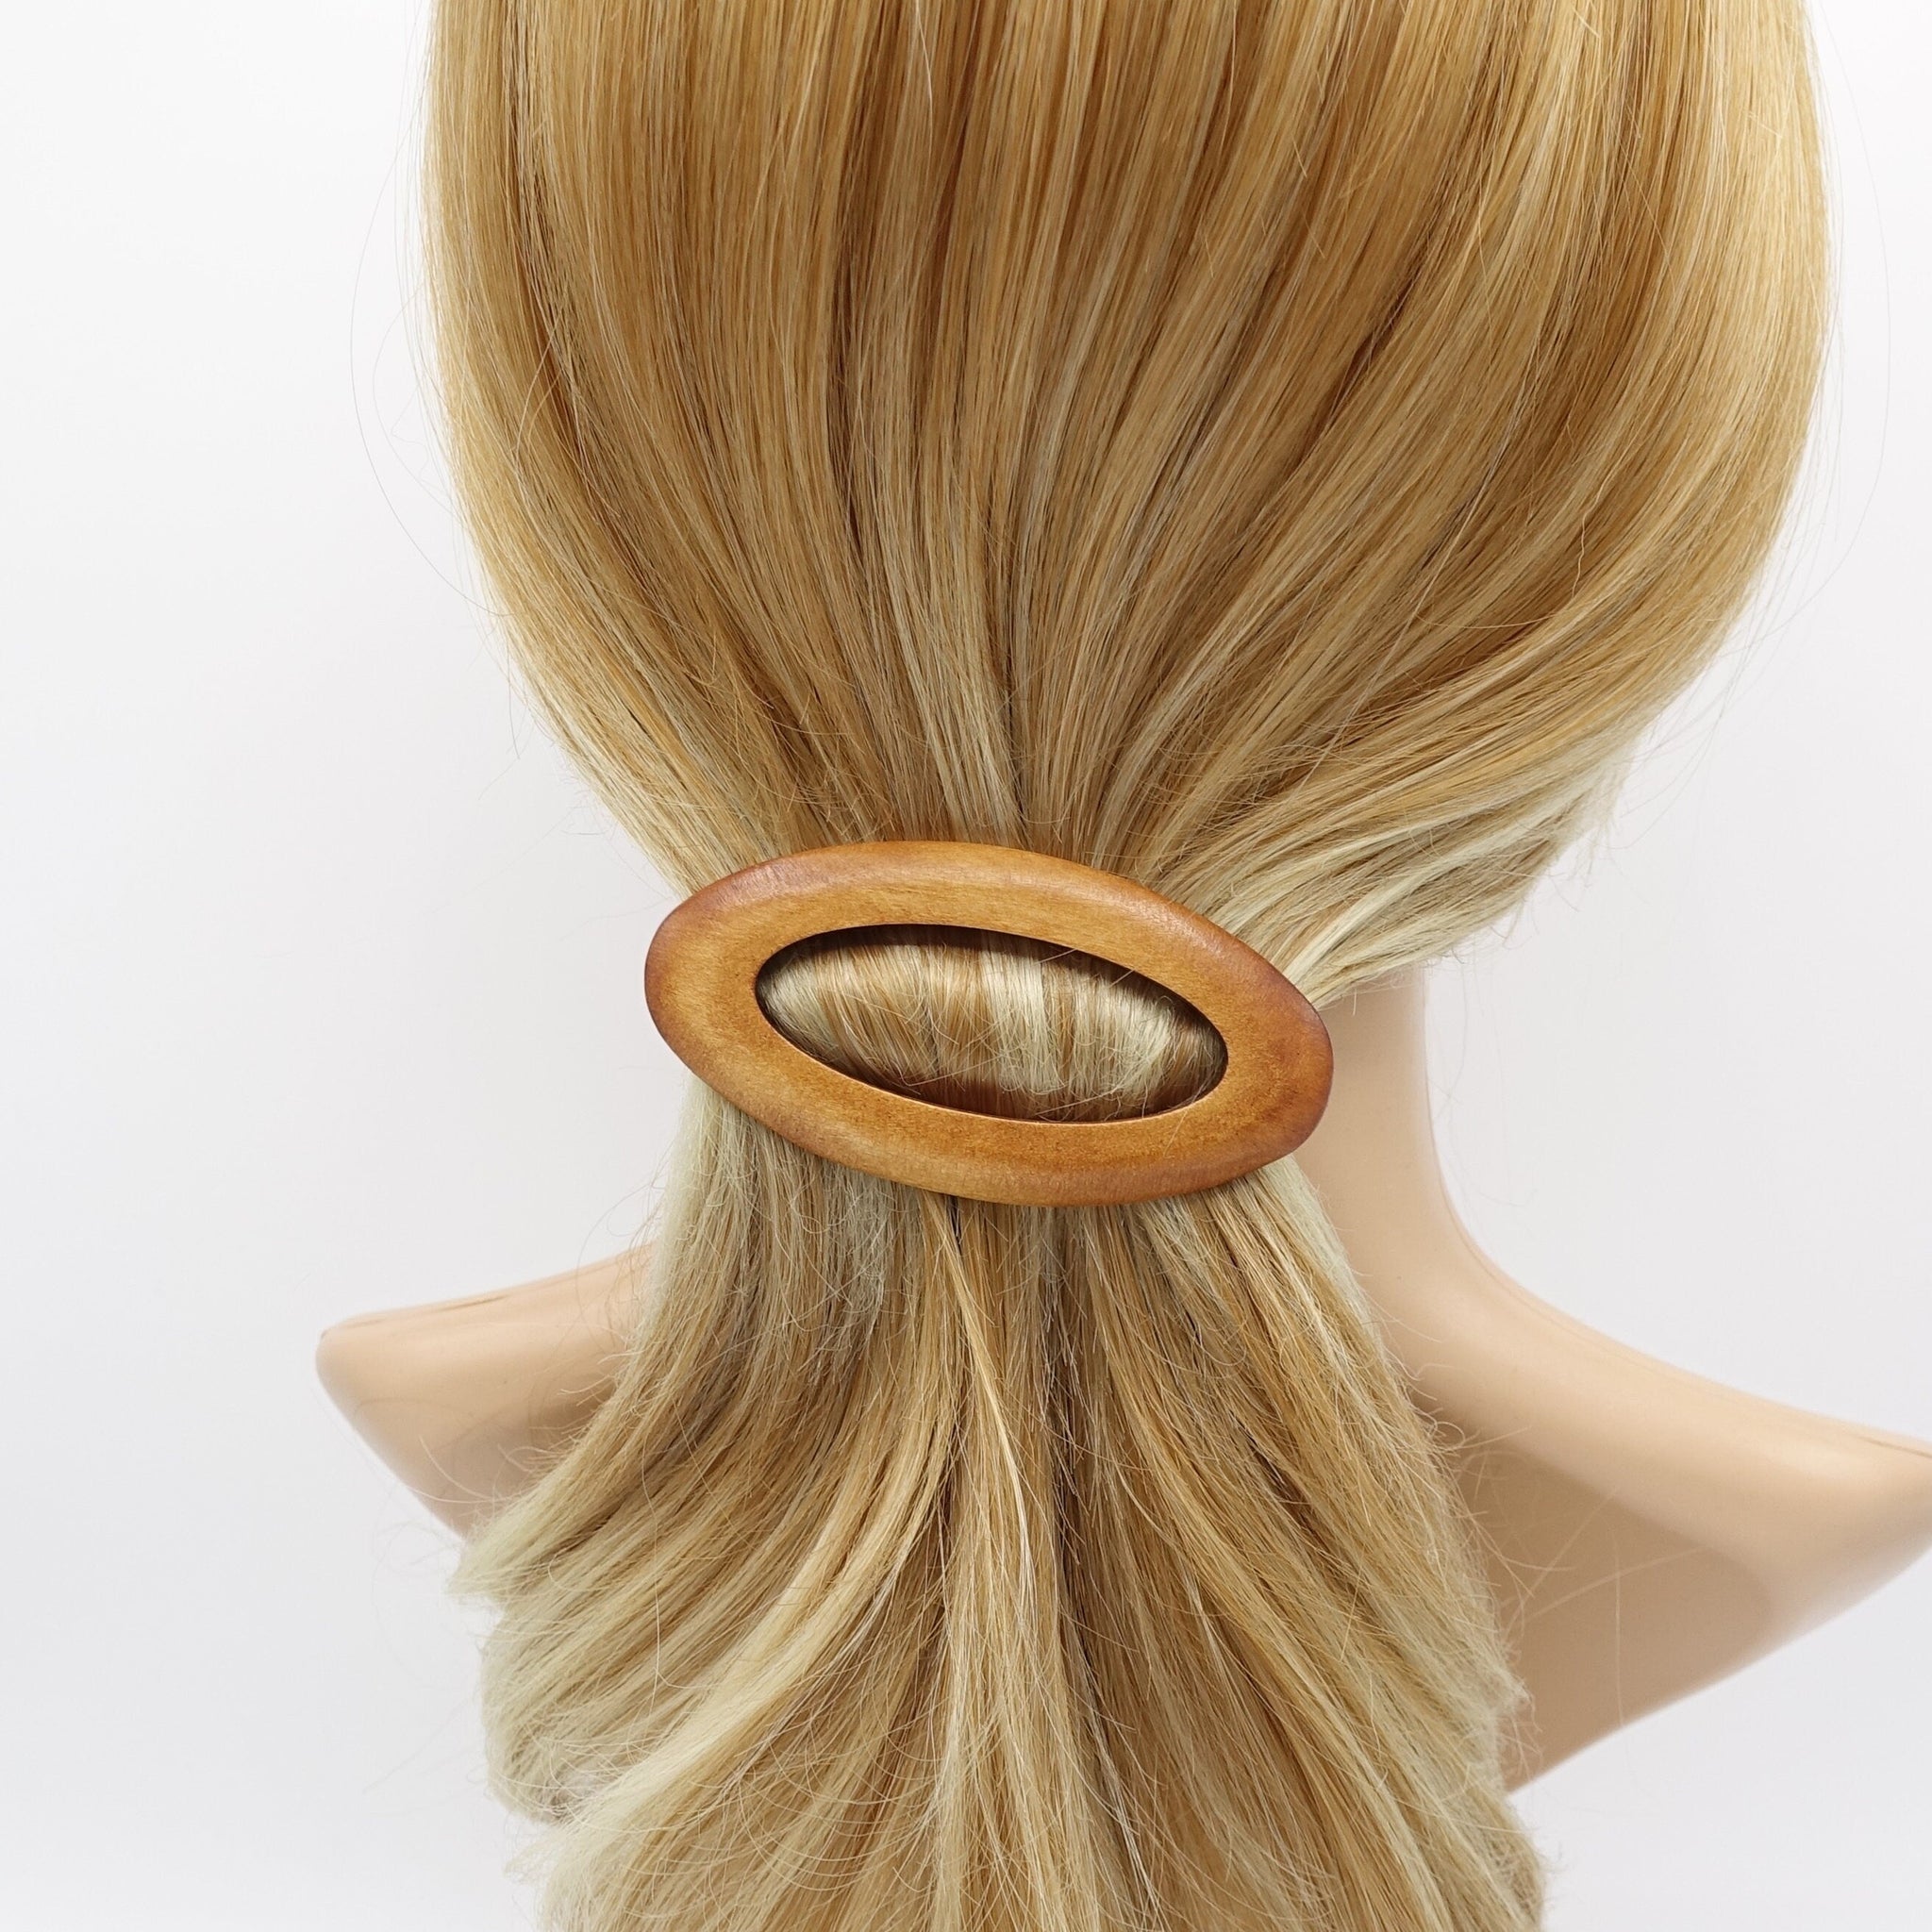 veryshine.com Barrette (Bow) Tan oval wood barrette natural hair accessory for women